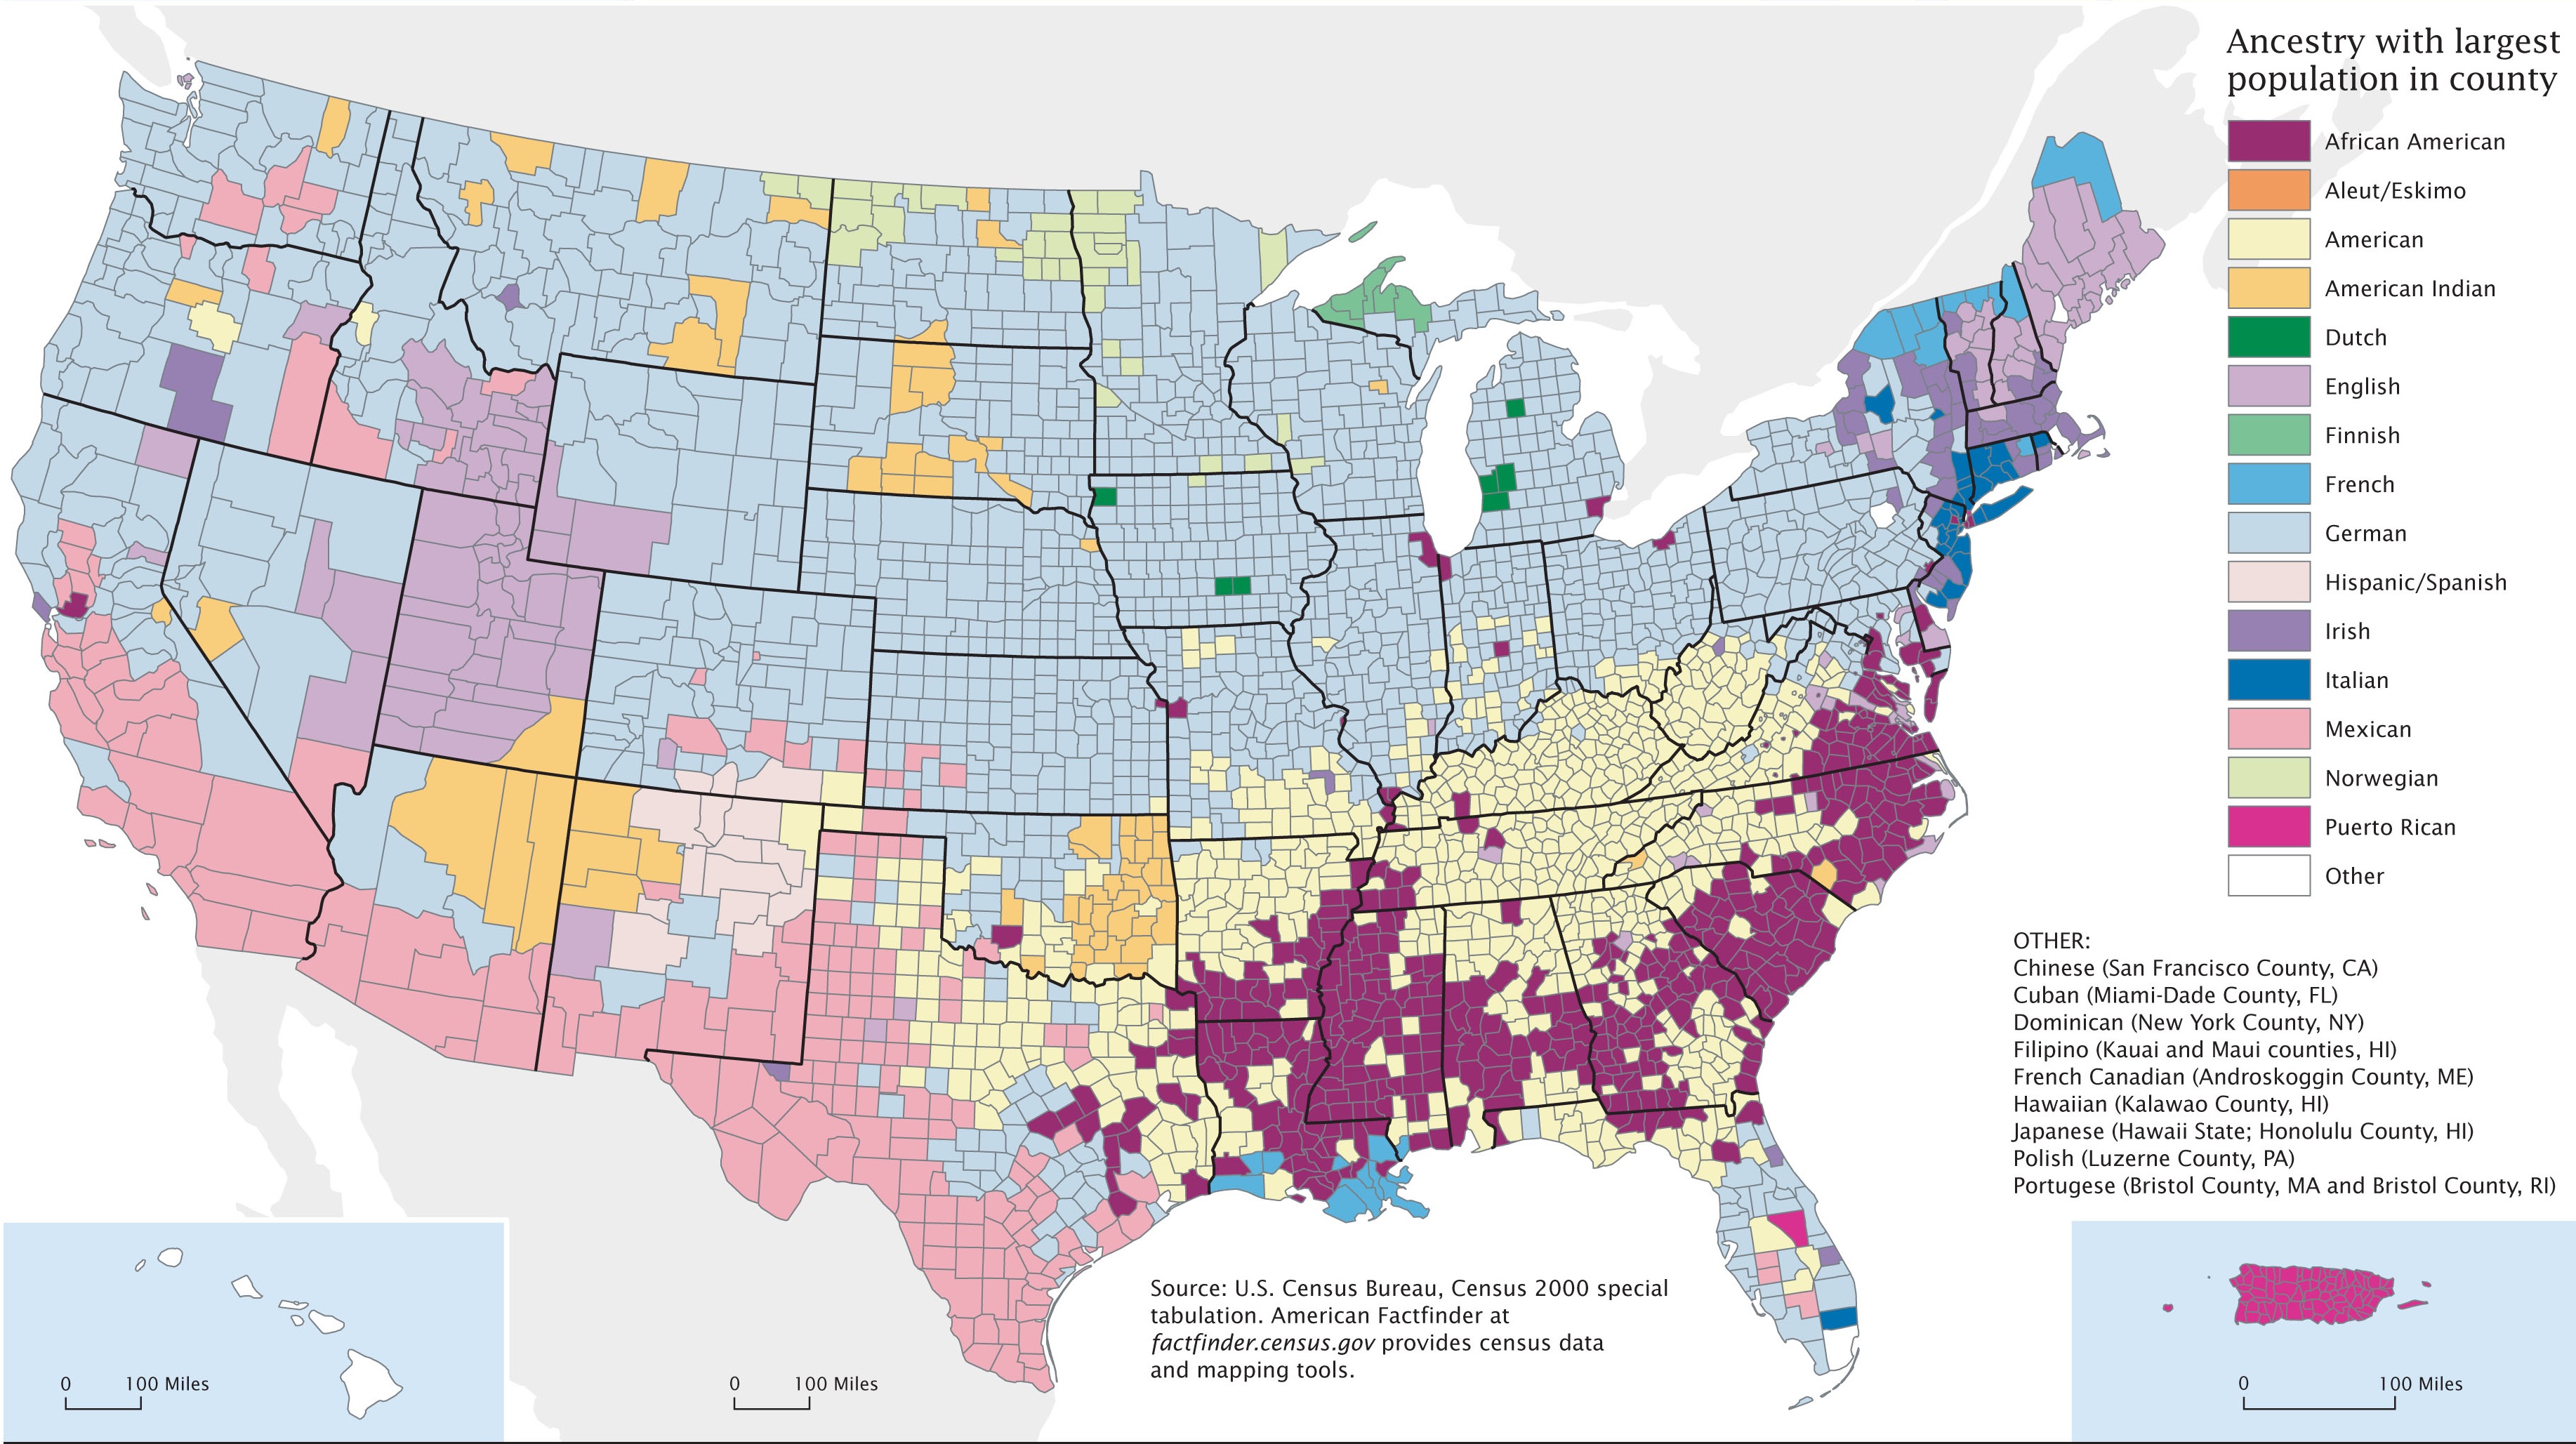 census-2000-data-top-us-ancestries-by-county-2.jpg